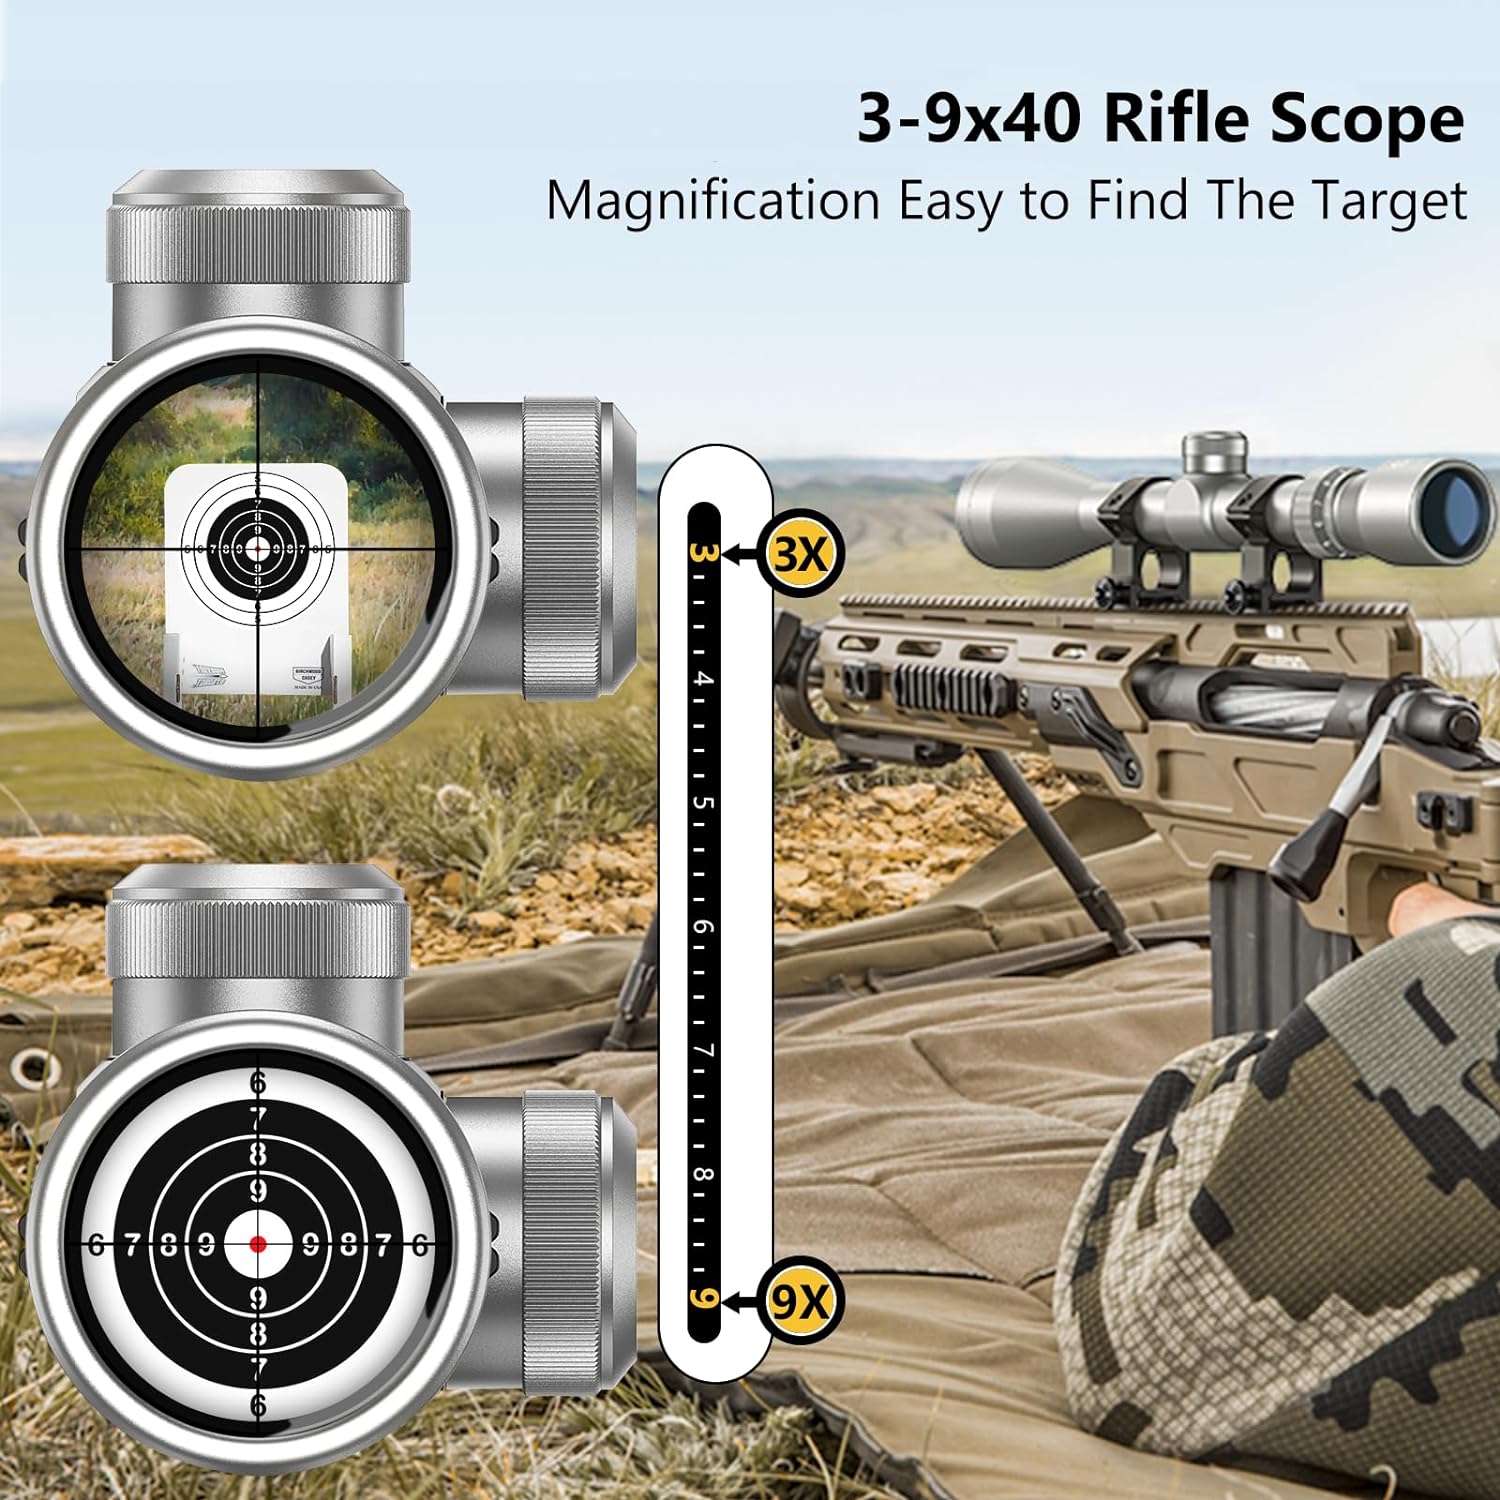 CVLIFE 3-9x40 Optics R4 Reticle Crosshair Scope with Free Mounts - CVLIFE 3-9x40 Optics R4 Reticle Crosshair Scope Review